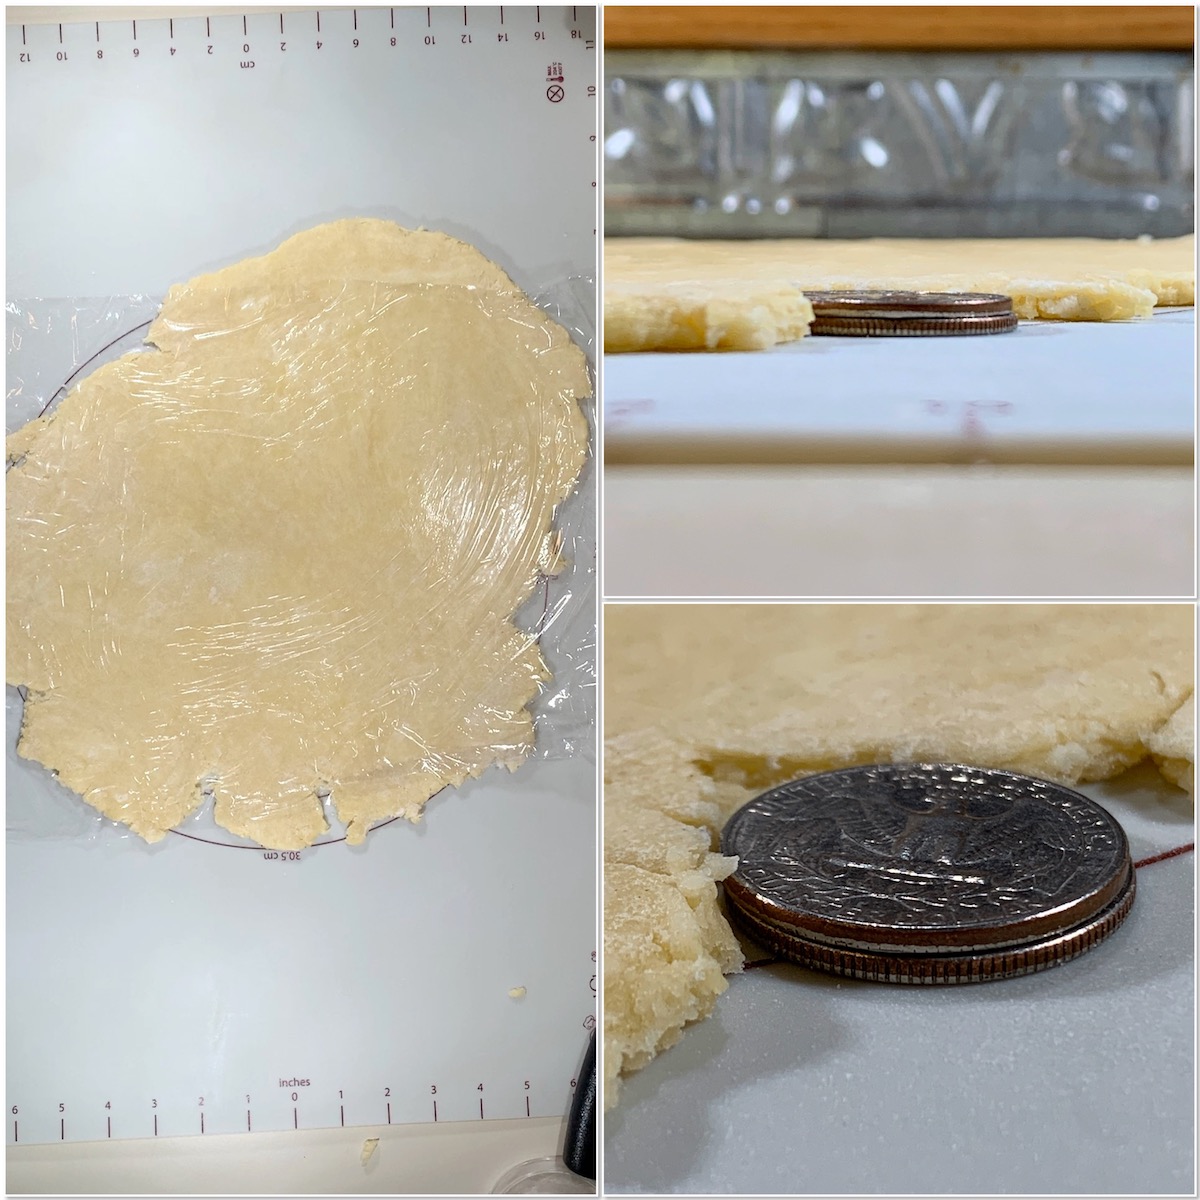 Measuring the height of Rolling out Sourdough Shortcrust Pastry dough with quarters closeup